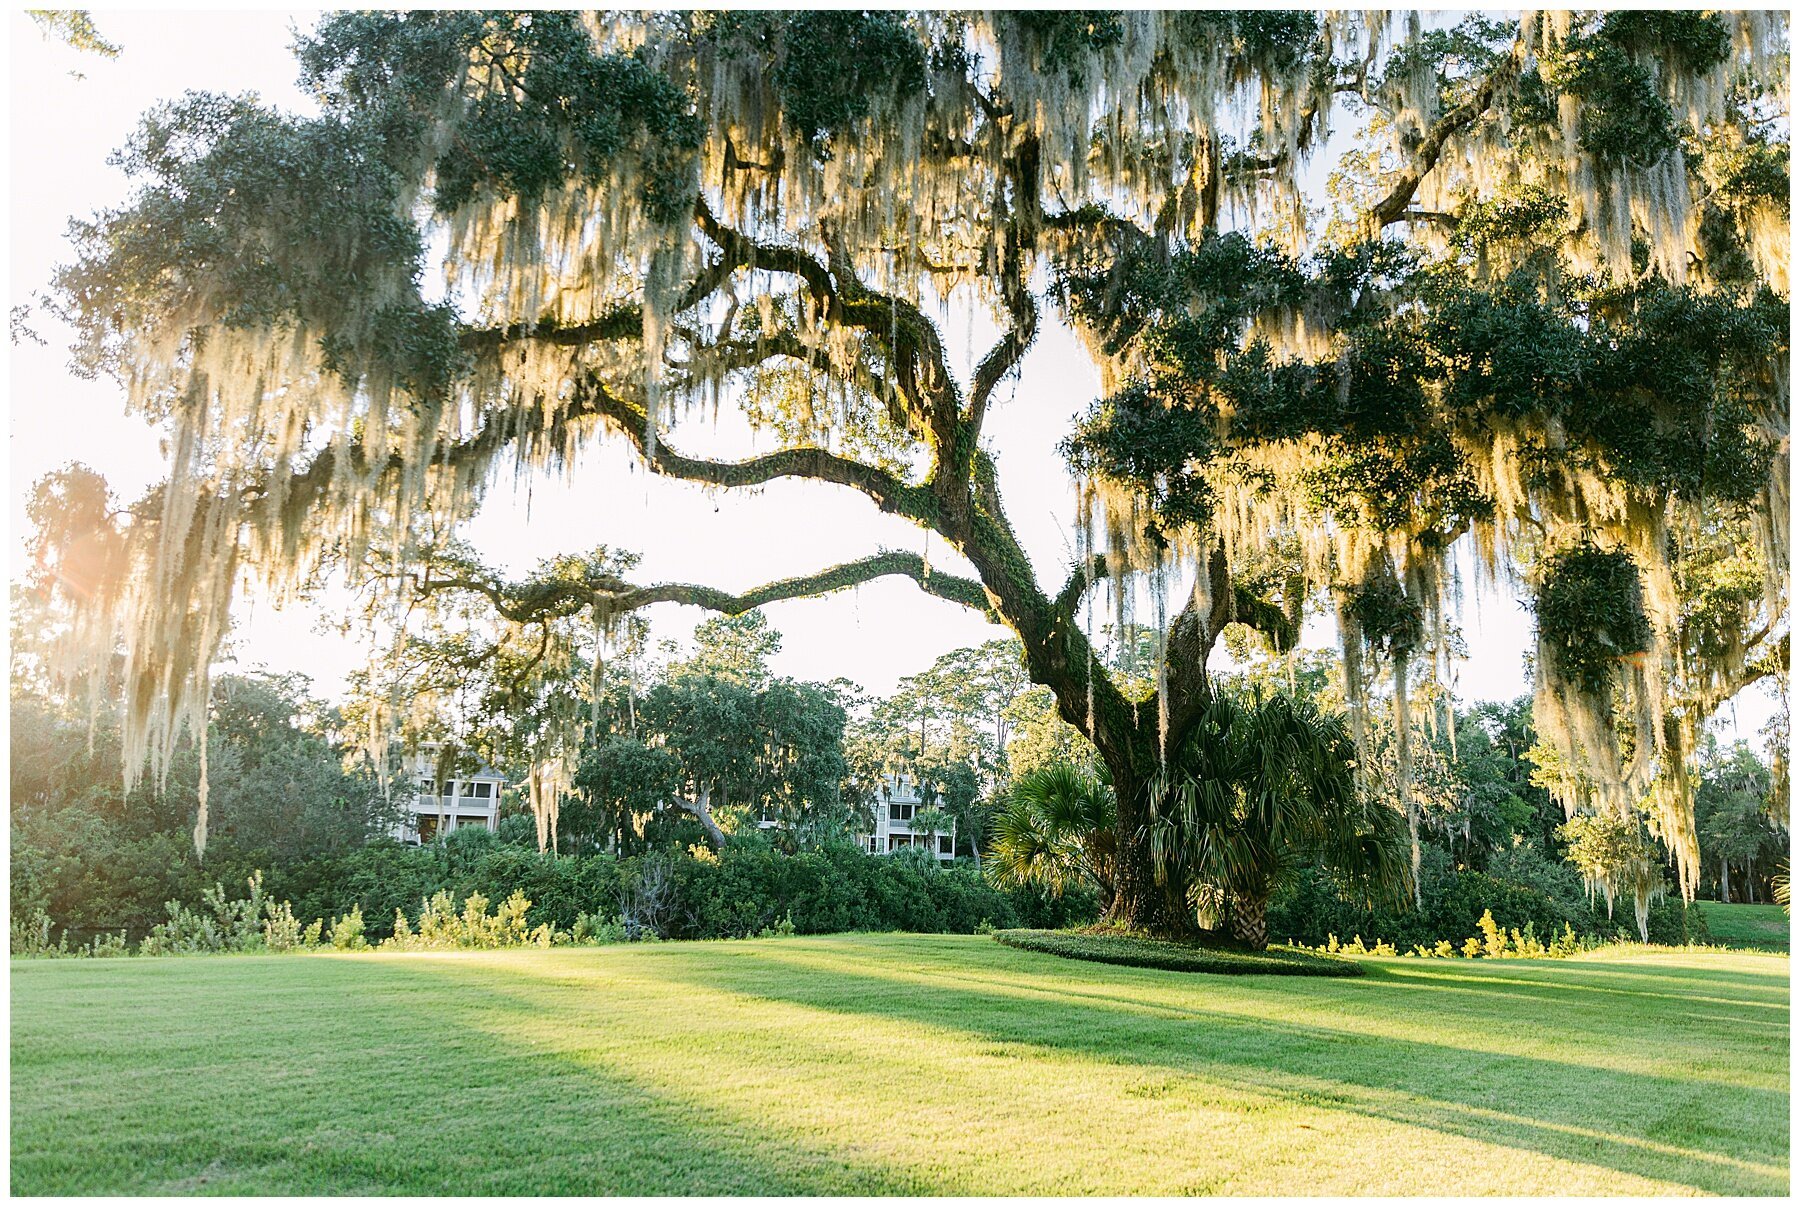 Katherine_Ives_Photography_Mcmillen_Montage_Palmetto_Bluff_13.jpg